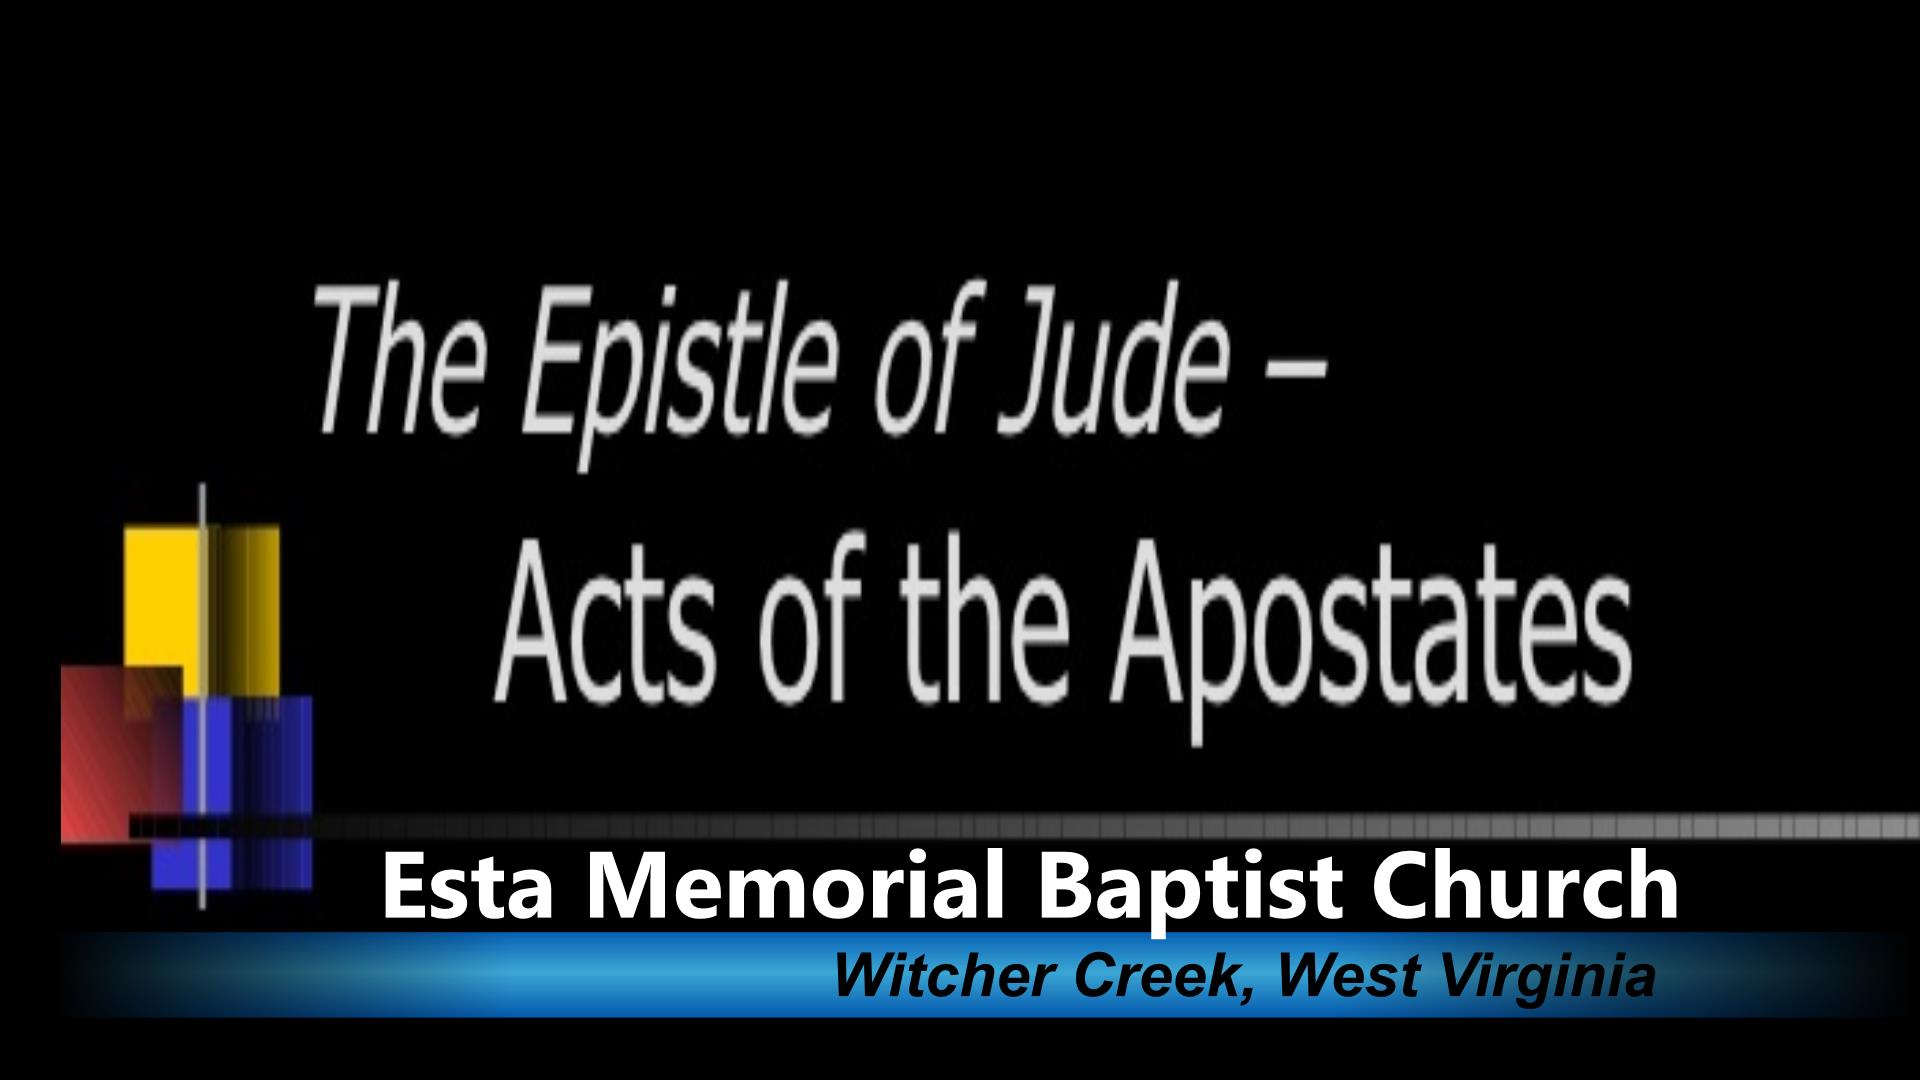 ACTS OF THE APOSTATES